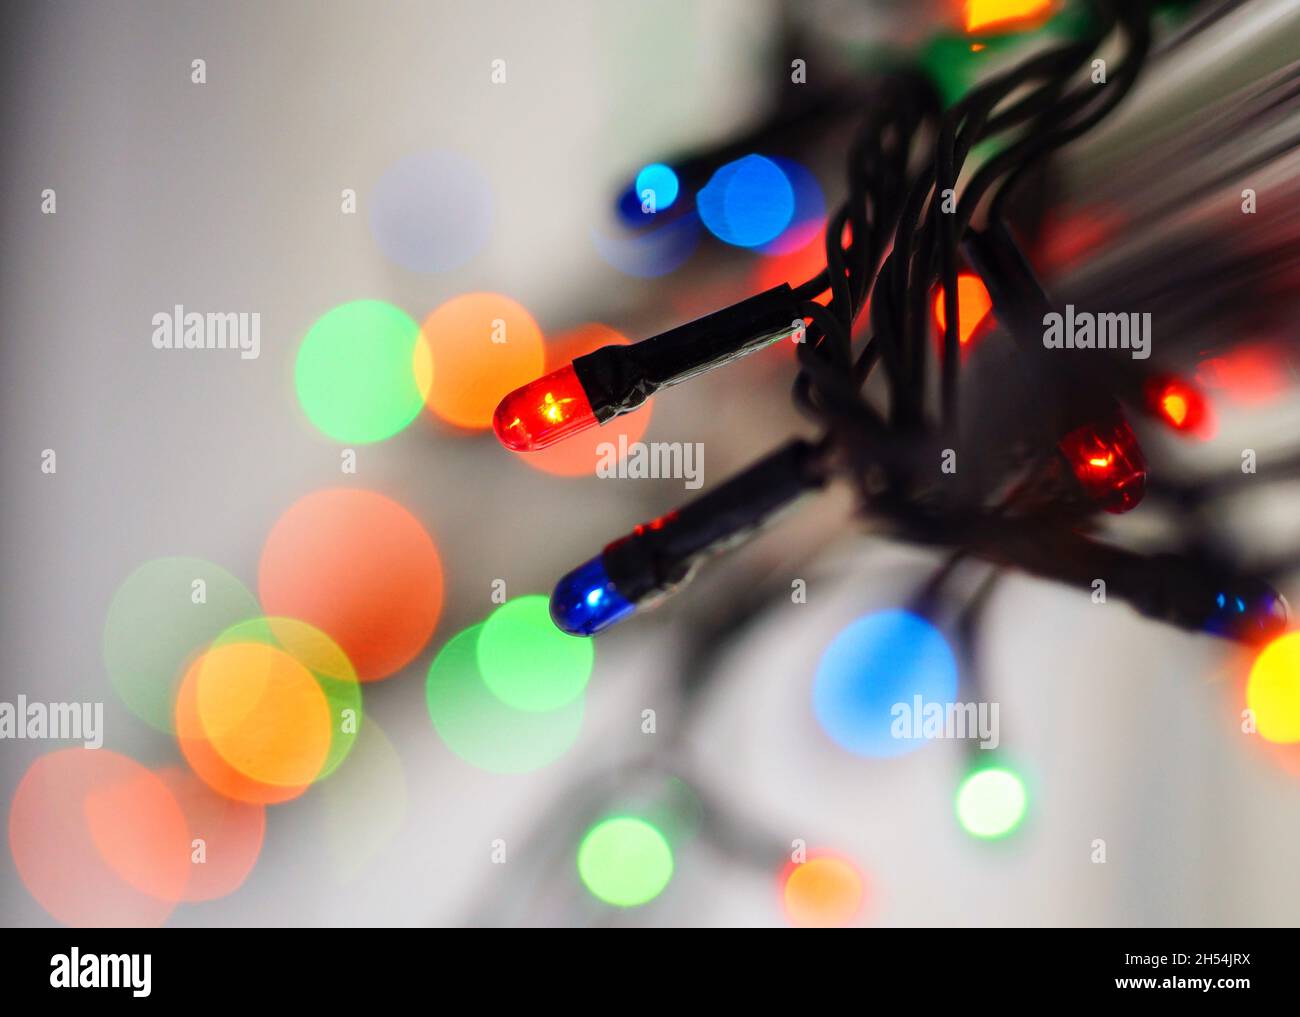 Blurred colored bright lights. Bokeh and art wallpaper concept. Christmas concept. Red, blue, green, orange lights. Stock Photo